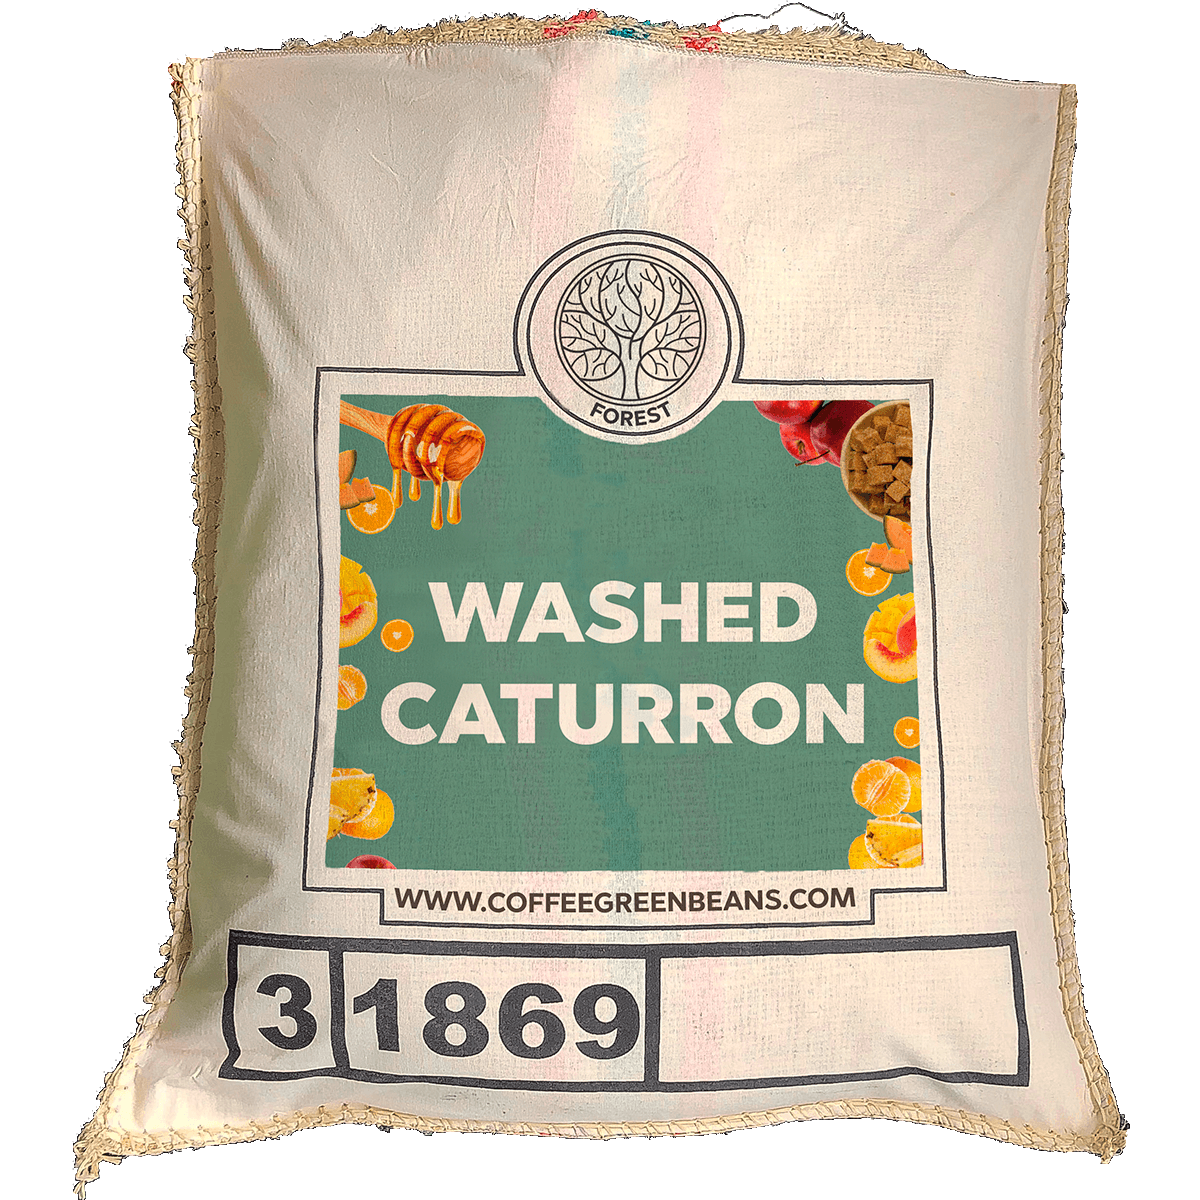 WASHED CATURRON - Forest Coffee 